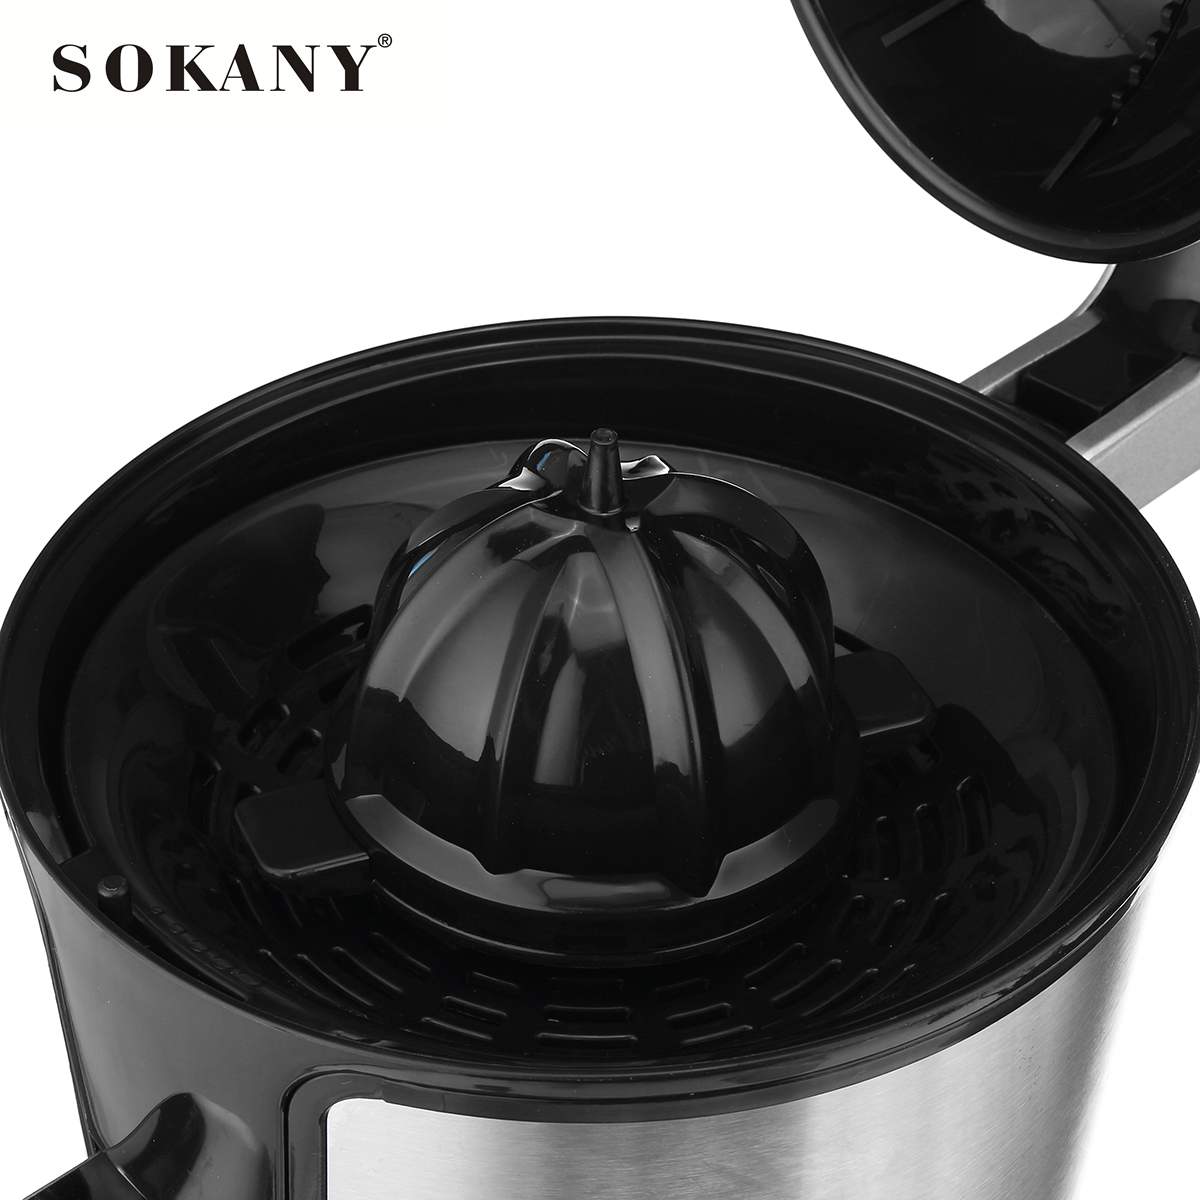 SOKANY Stainless Steel Juicer 350W Orange Lemon Electric Juicers Fruits Squeezer Extractor for Kitchen Home Appliances